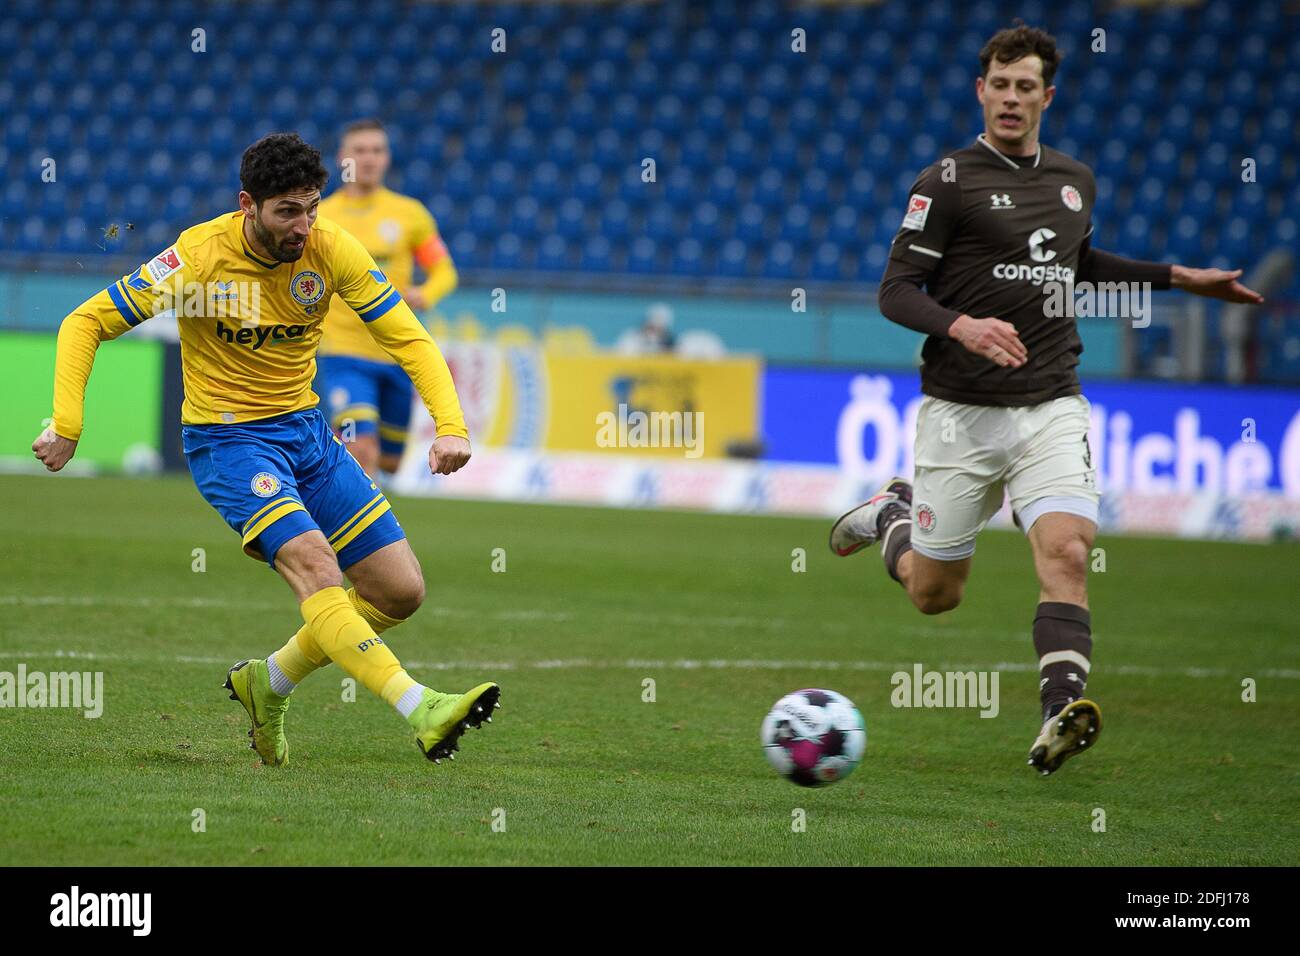 Brunswick, Germany. 05th Dec, 2020. Football: 2nd Bundesliga, Eintracht Braunschweig - FC St. Pauli, 10th matchday at the Eintracht stadium. Braunschweig's Fabio Kaufmann (l) scores the goal to make it 2:1. Credit: Swen Pförtner/dpa - IMPORTANT NOTE: In accordance with the regulations of the DFL Deutsche Fußball Liga and the DFB Deutscher Fußball-Bund, it is prohibited to exploit or have exploited in the stadium and/or from the game taken photographs in the form of sequence images and/or video-like photo series./dpa/Alamy Live News Stock Photo